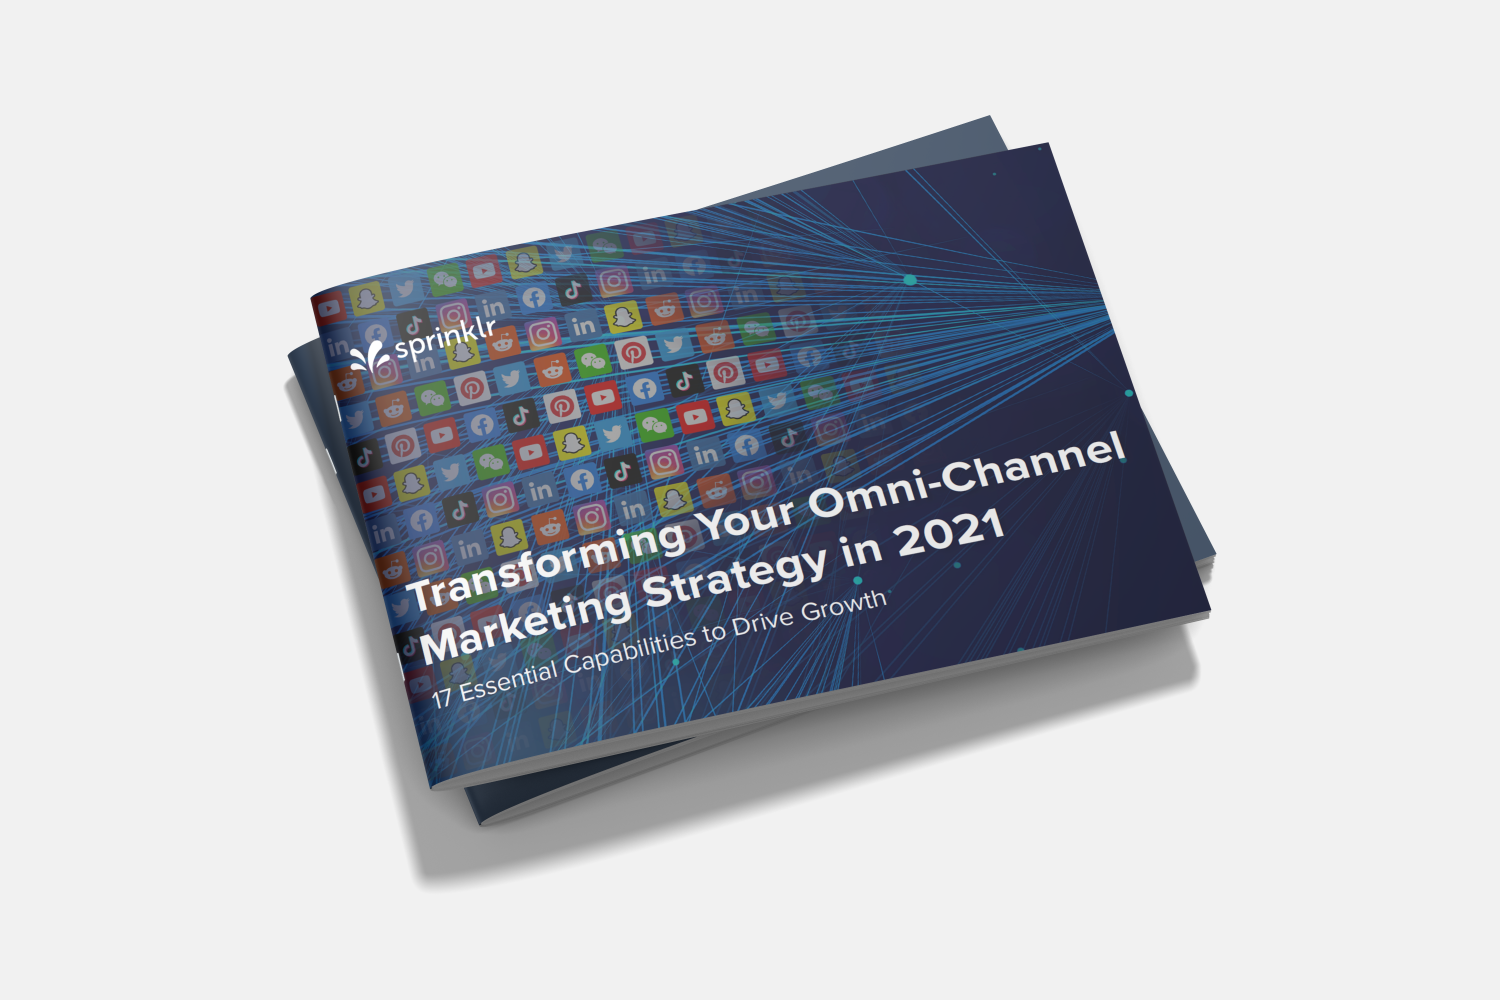 Transforming Your Omni-Channel Marketing Strategy in 2021